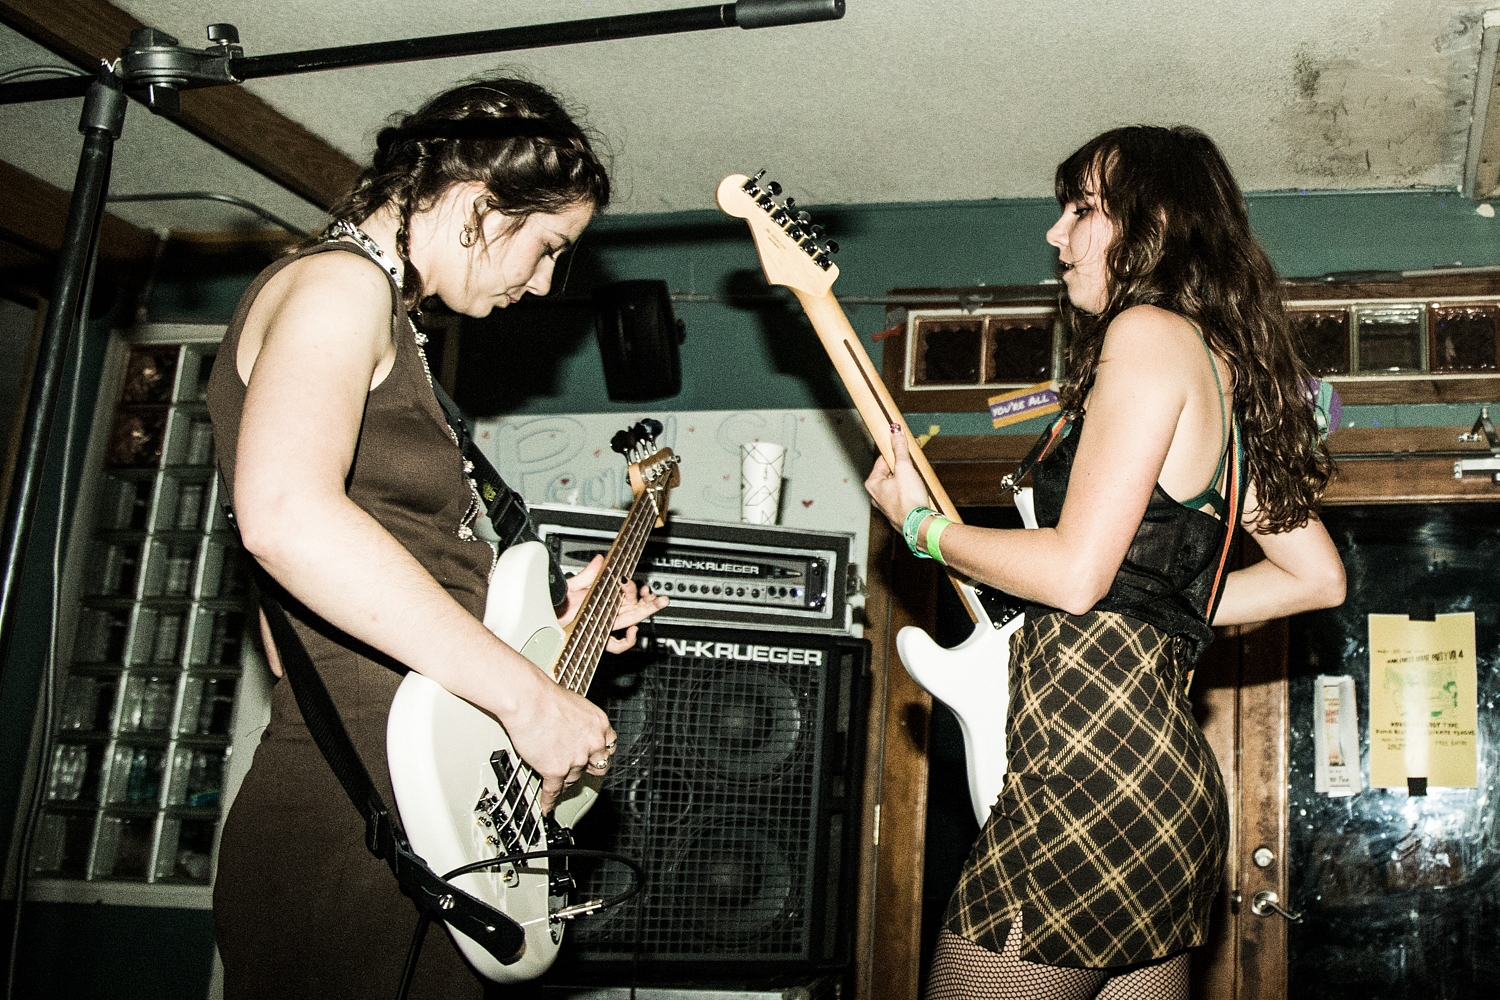 Day two of SXSW's cross-continental highlights, feat Body Type, NOTHING and more